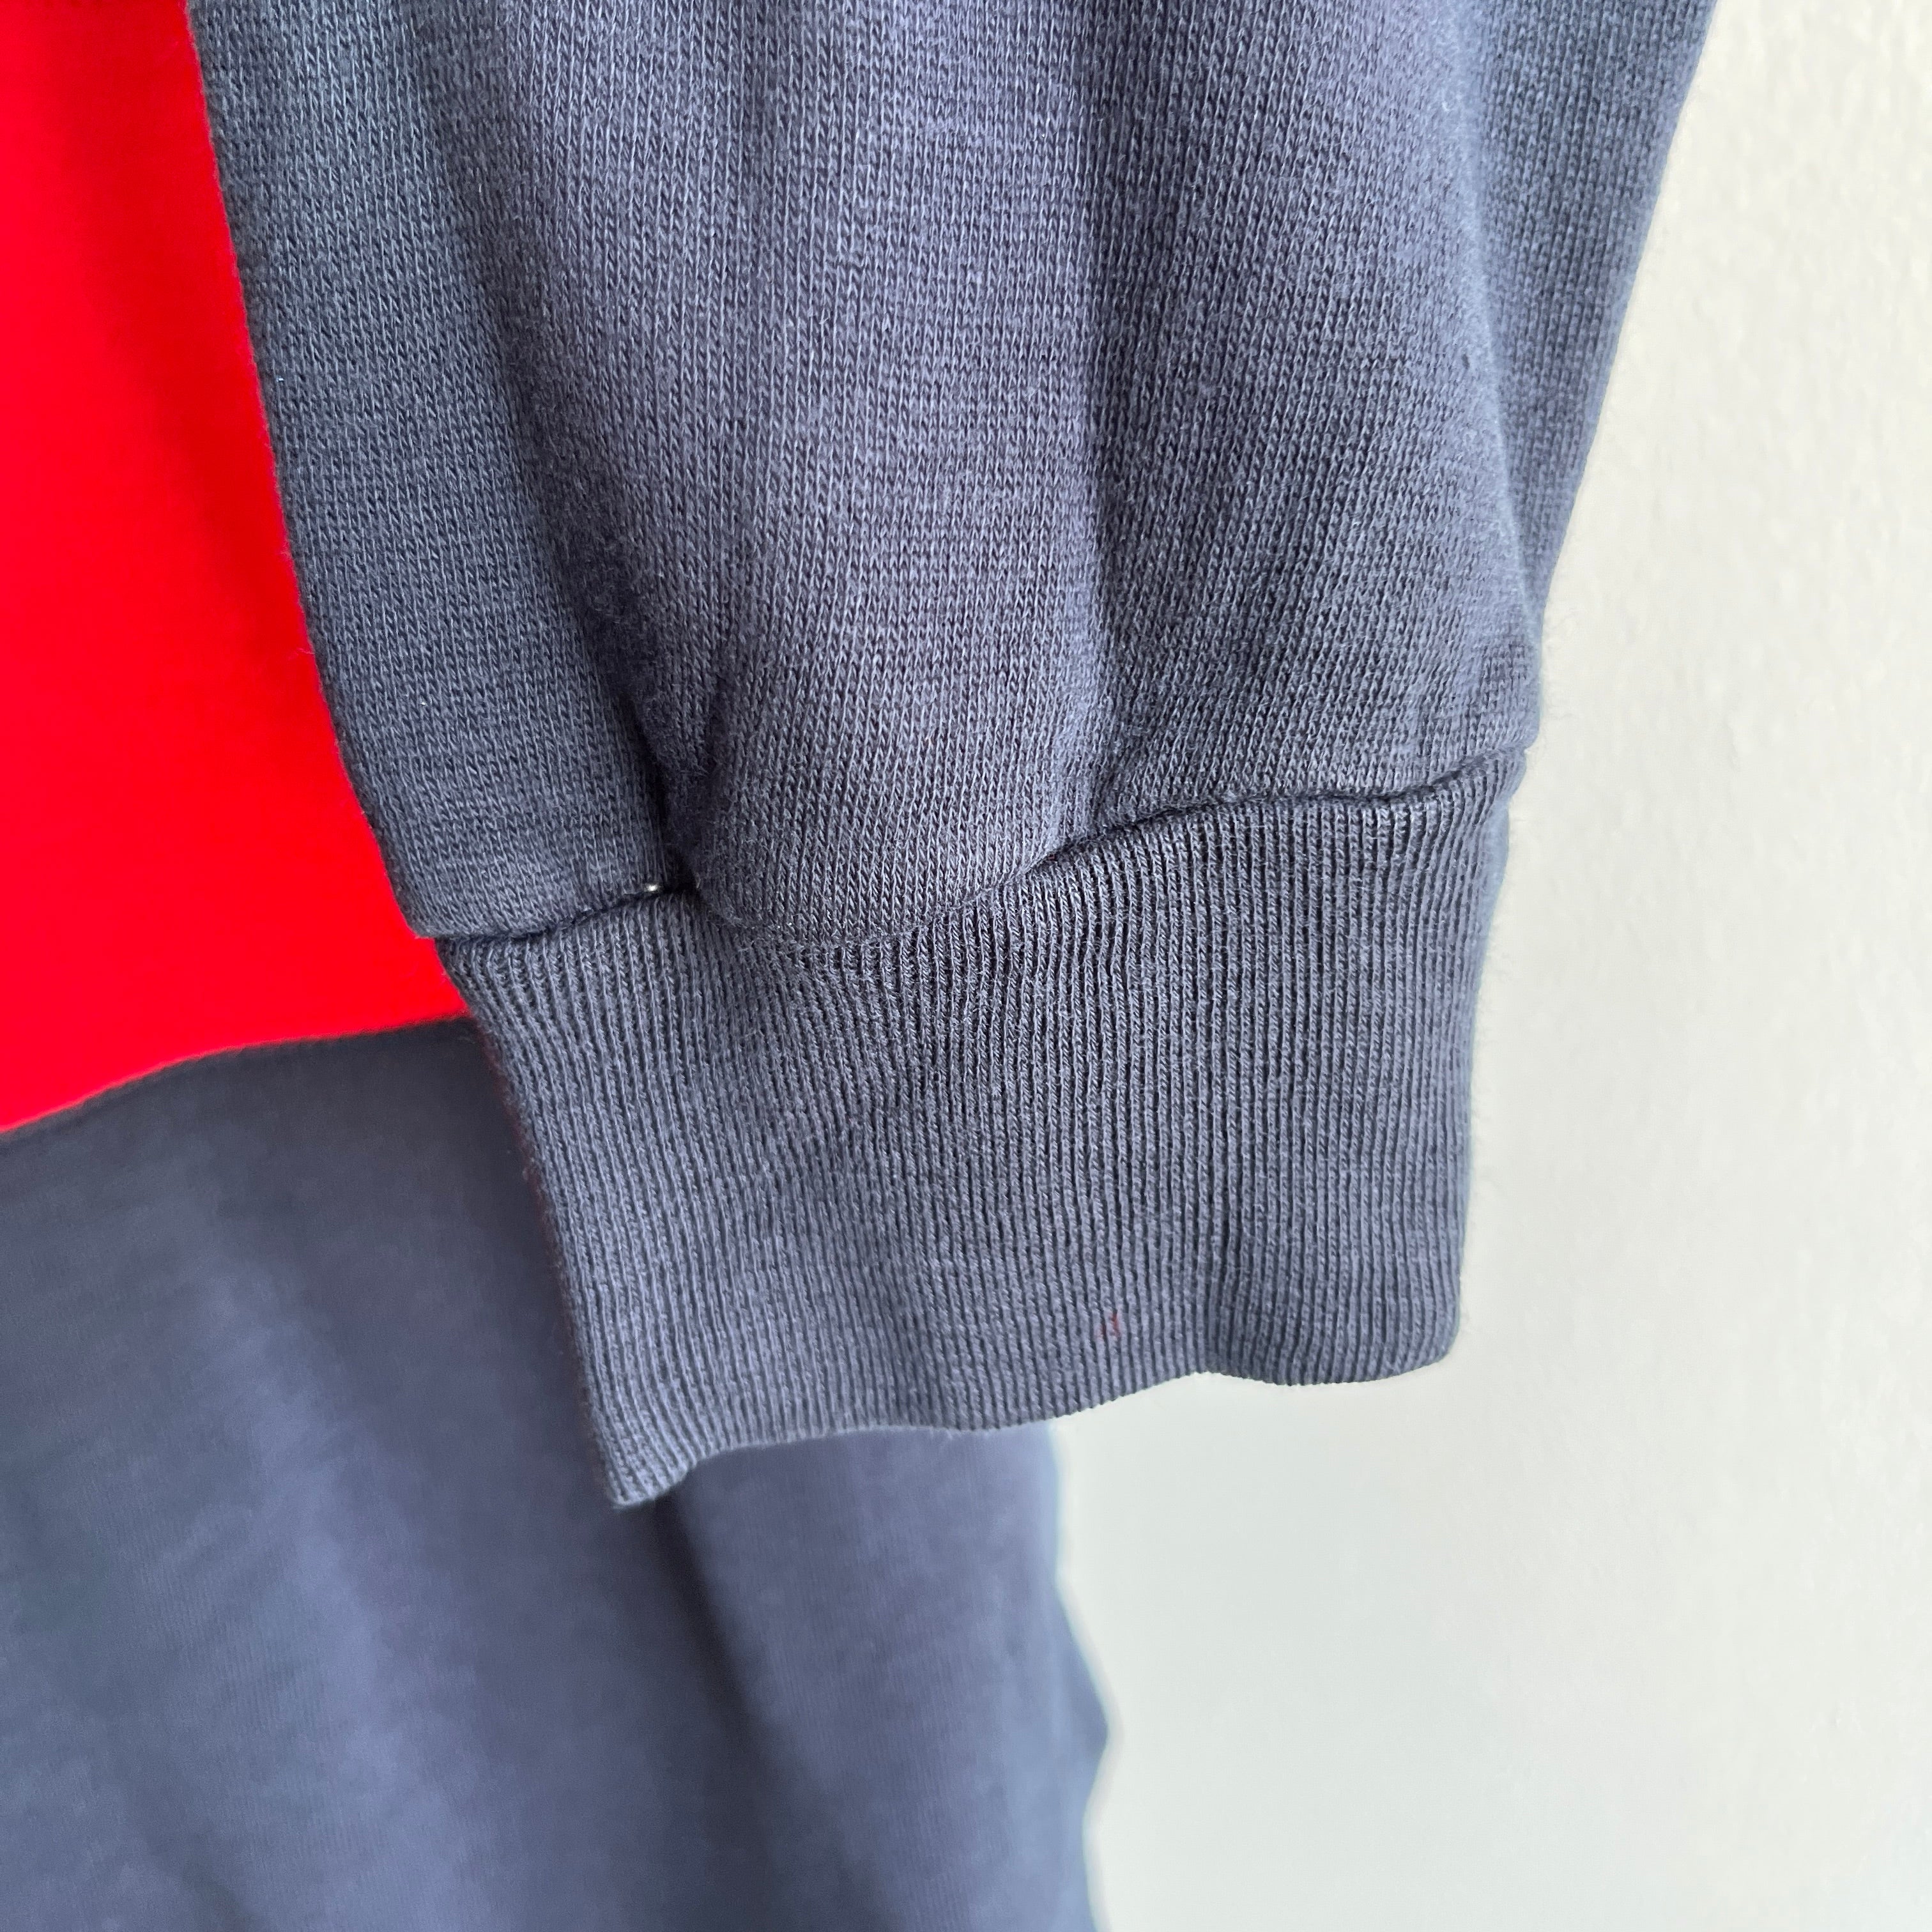 1980s Super DUper Soft and Slouchy Color Block Sweatshirt with Shoulder Pads and Stains